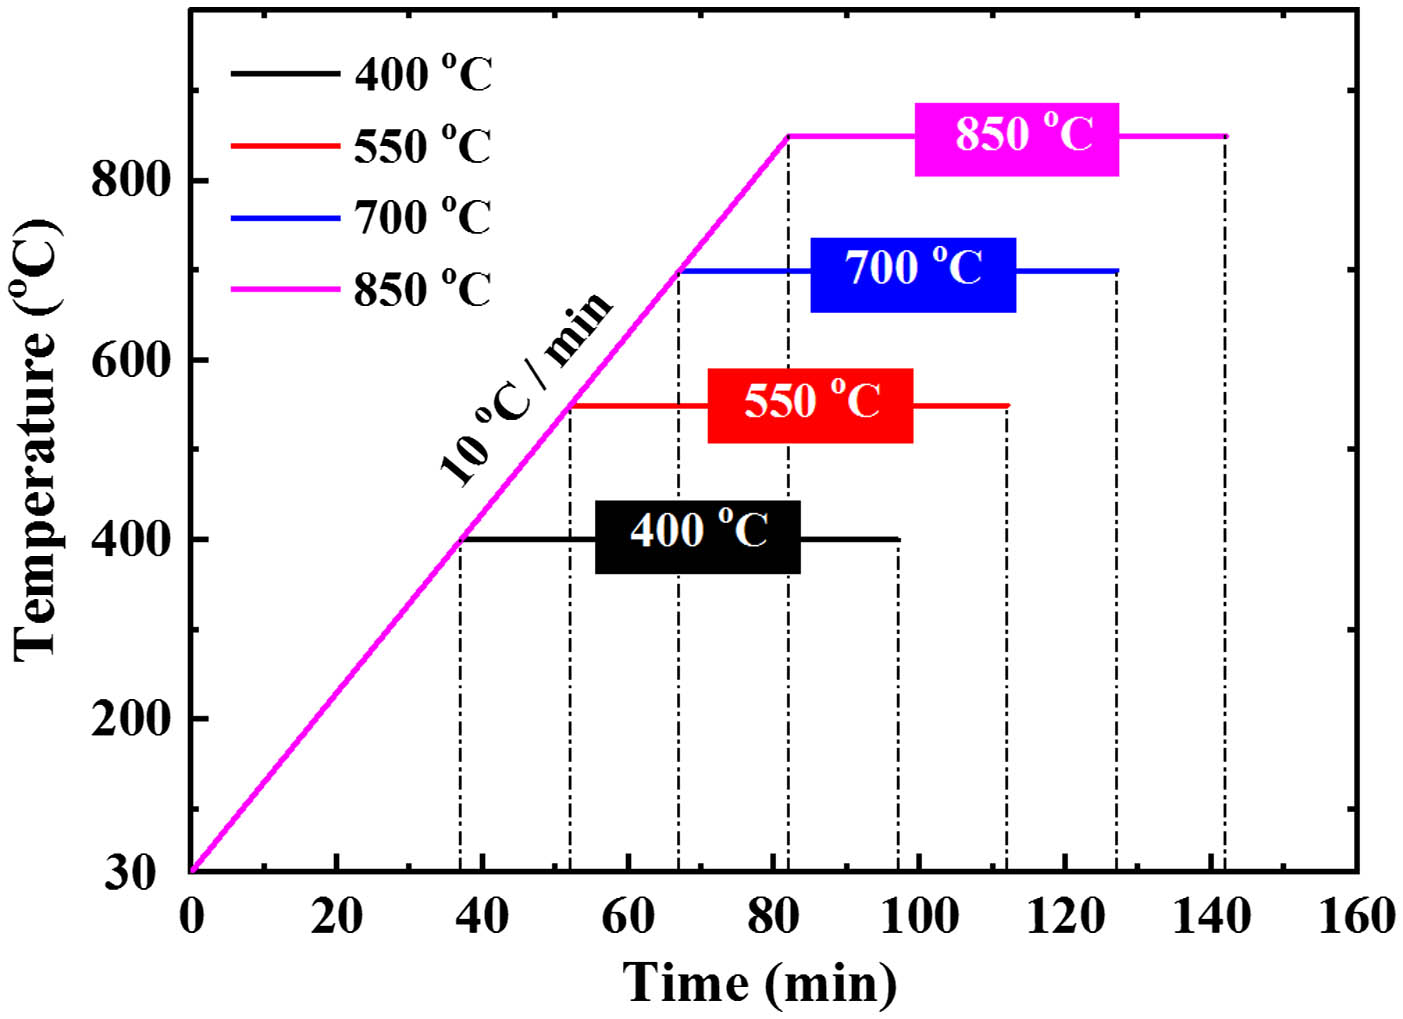 Annealing programs of the samples at 400°C, 550°C, 700°C, and 850°C.